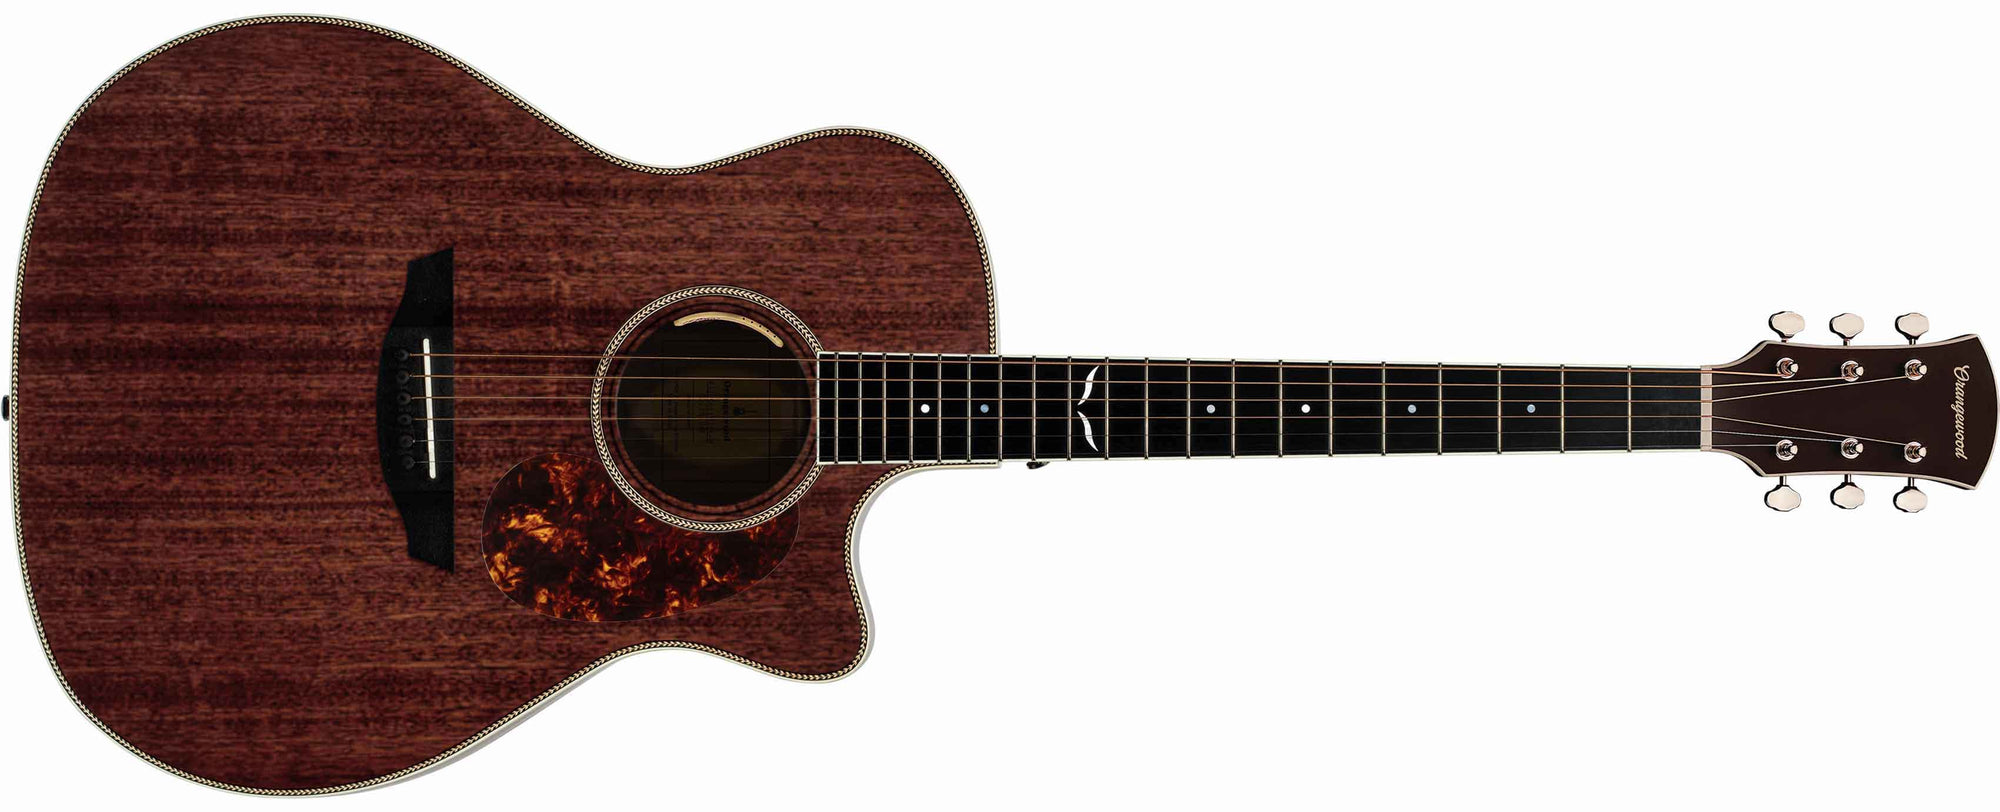 Mahogany grand auditorium cutaway acoustic electric guitar with an ebony fretboard, mother of pearl inlays, and silver hardware